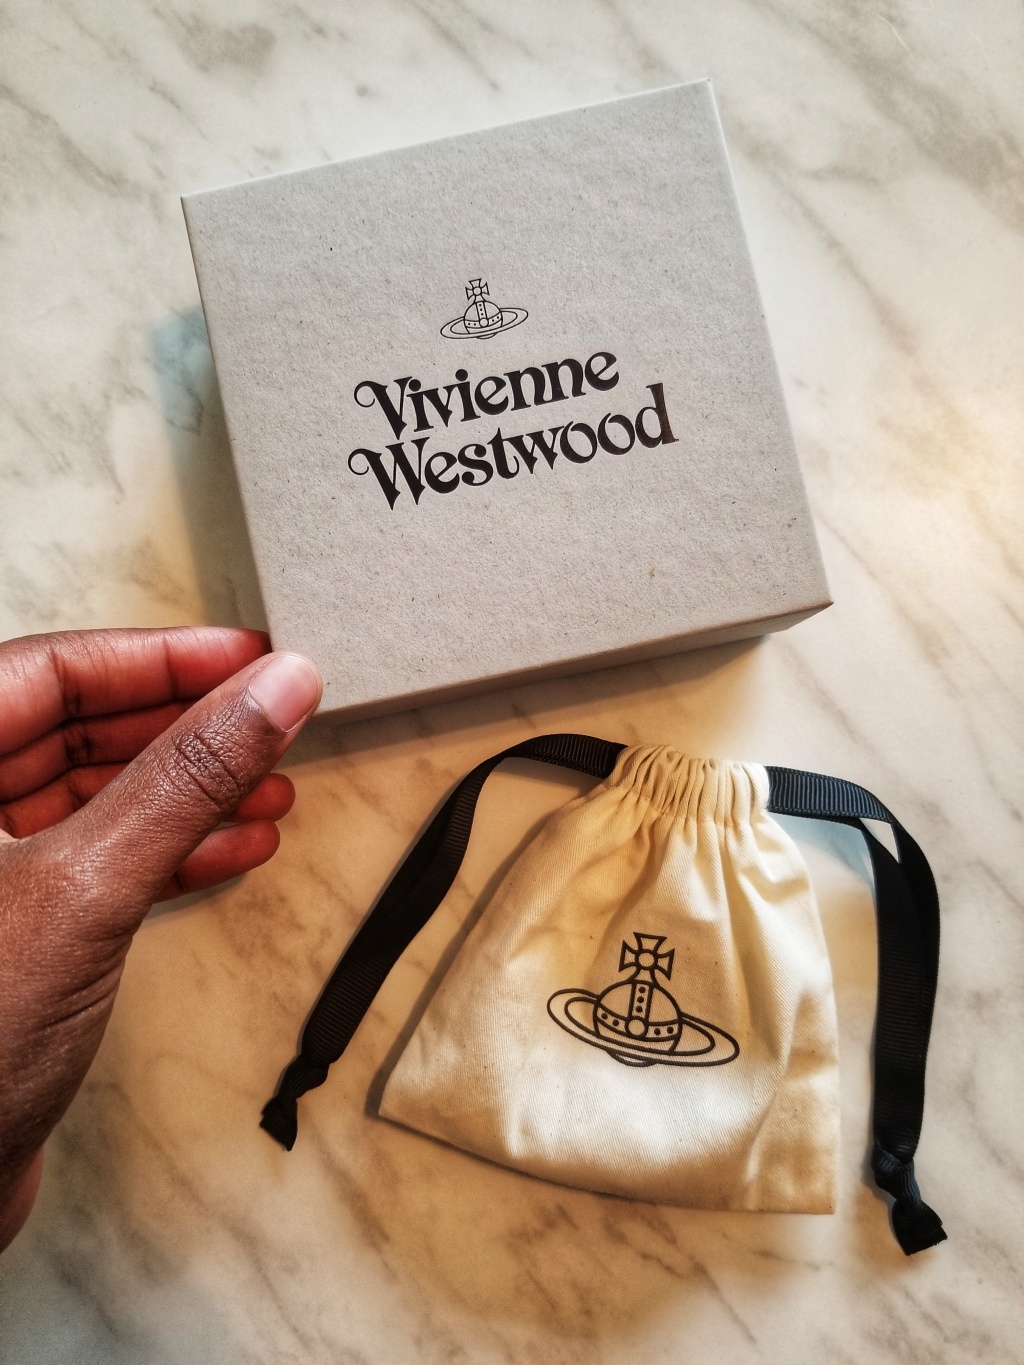 I Purchased My First Vivienne Westwood Necklace!